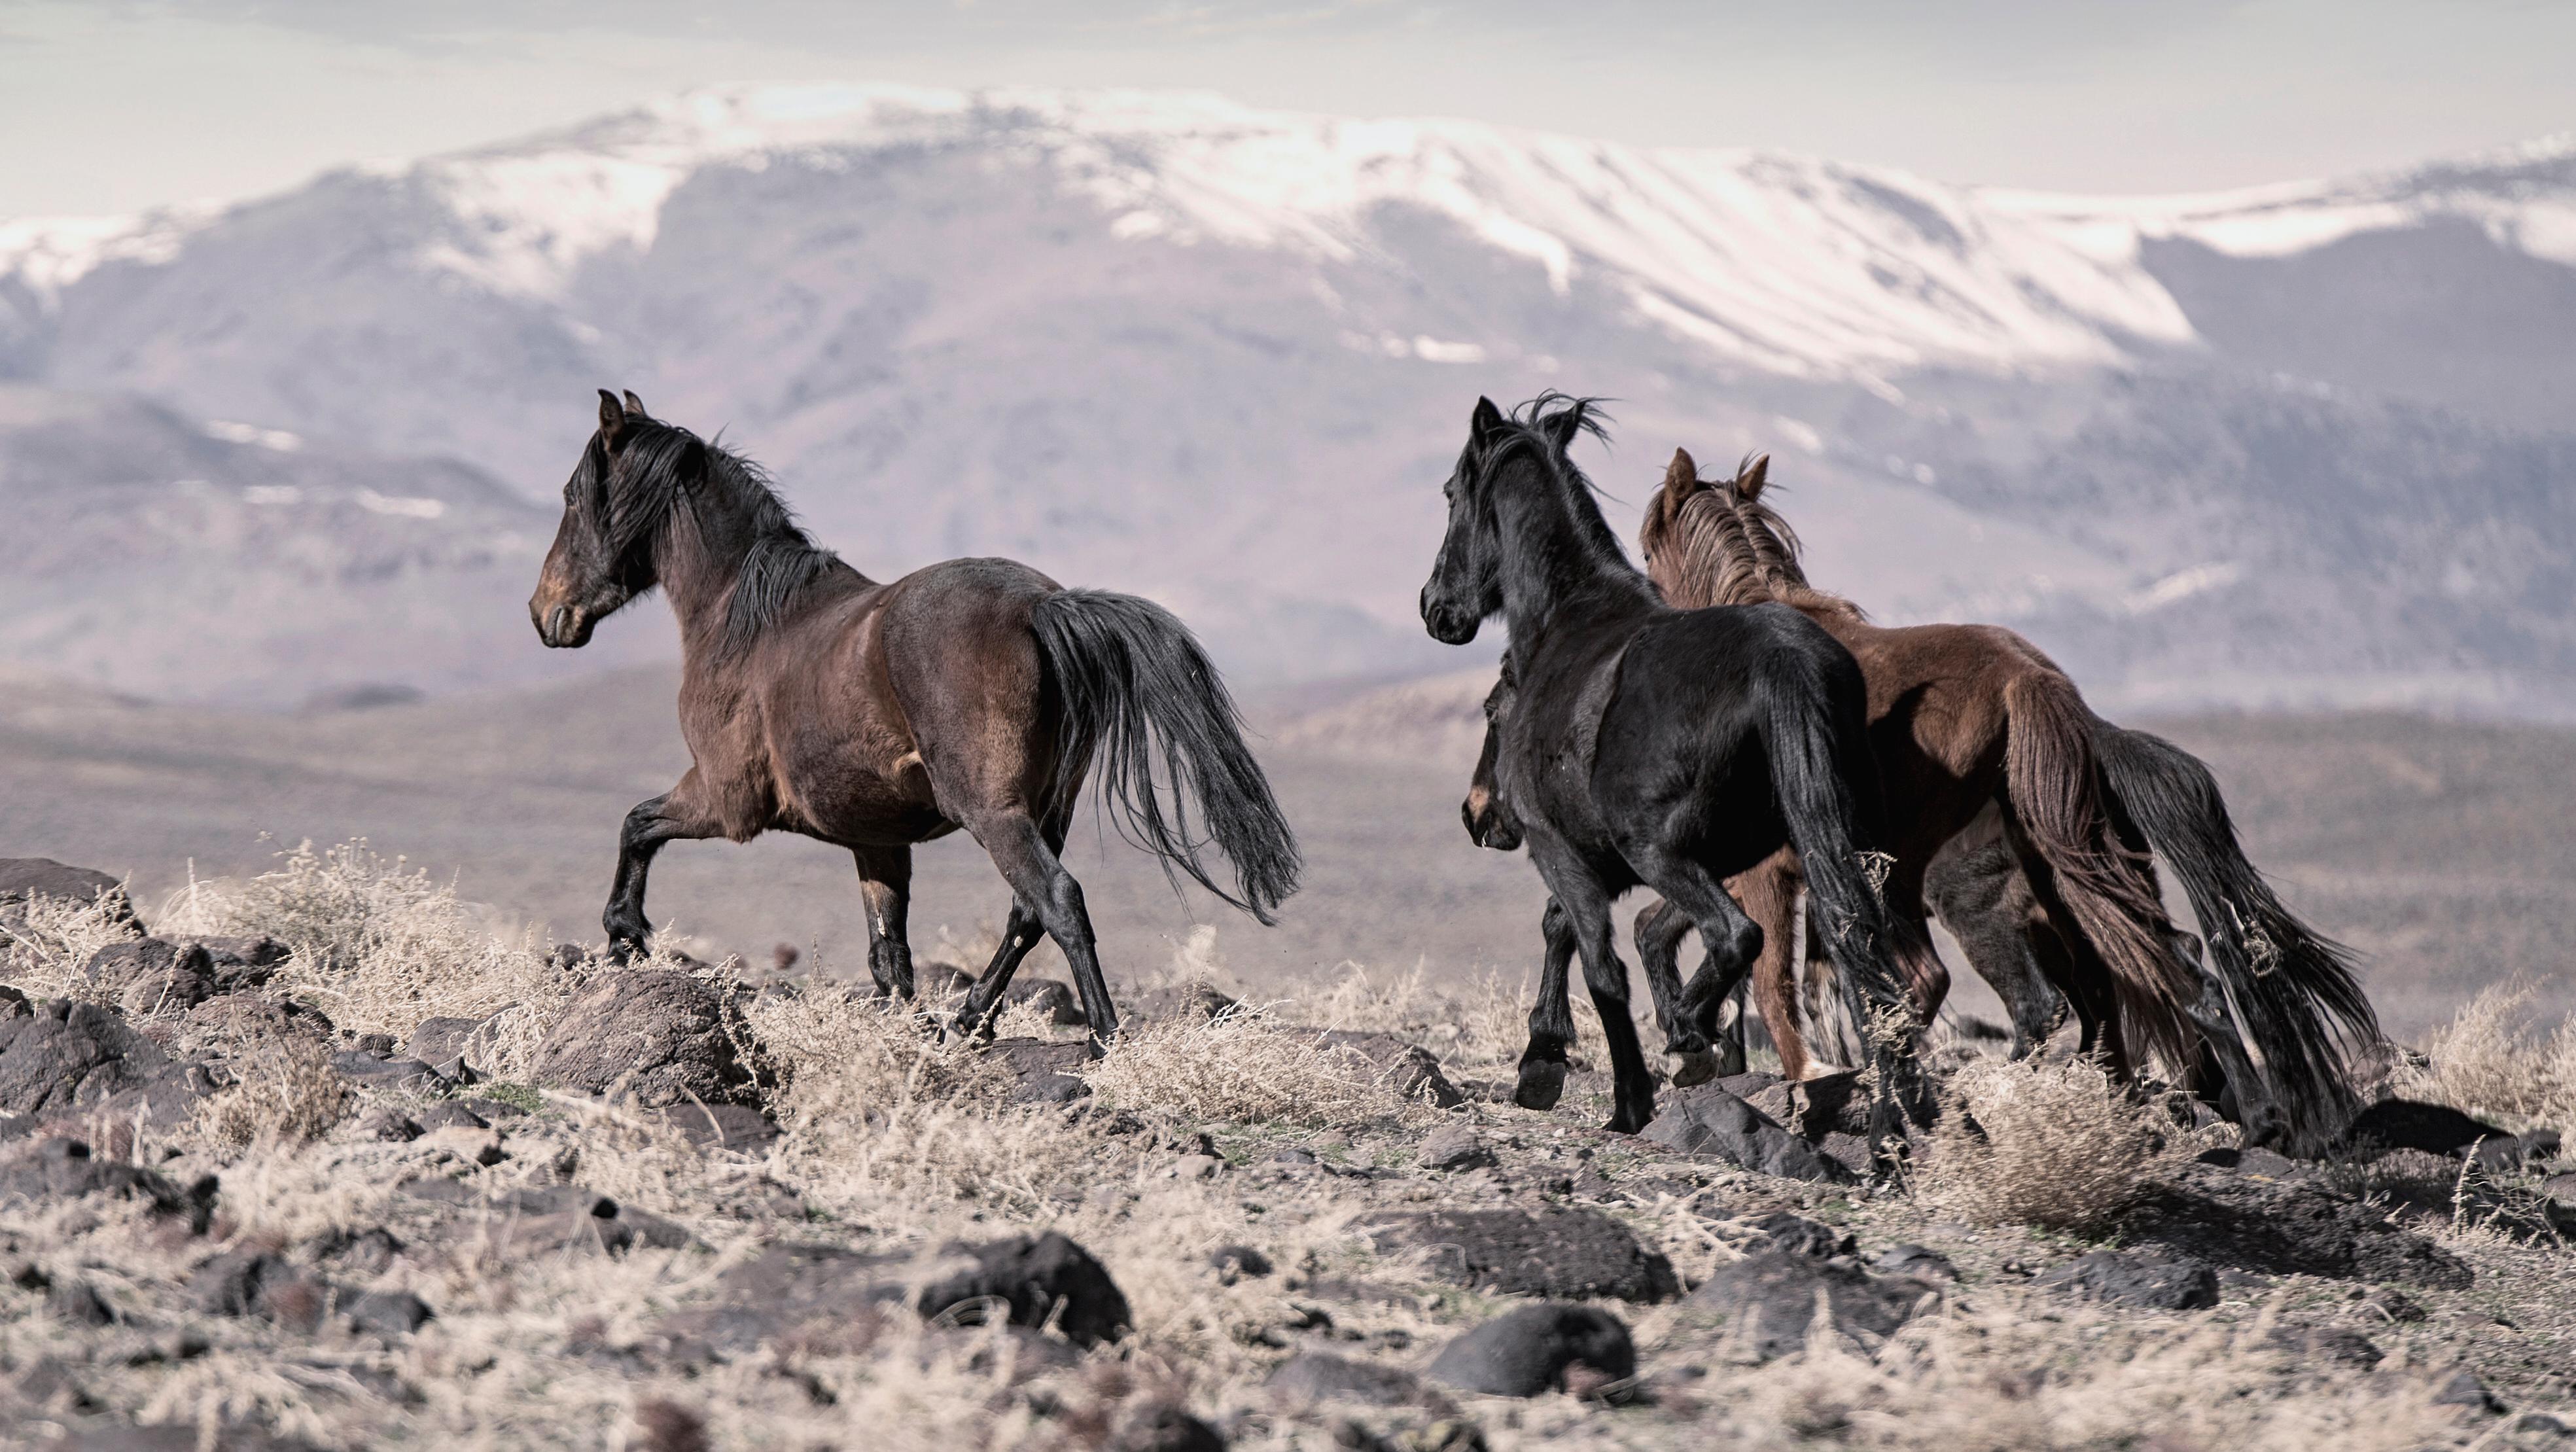 "On the Go" 40x55 Wild Horses, Mustangs by Shane Russeck